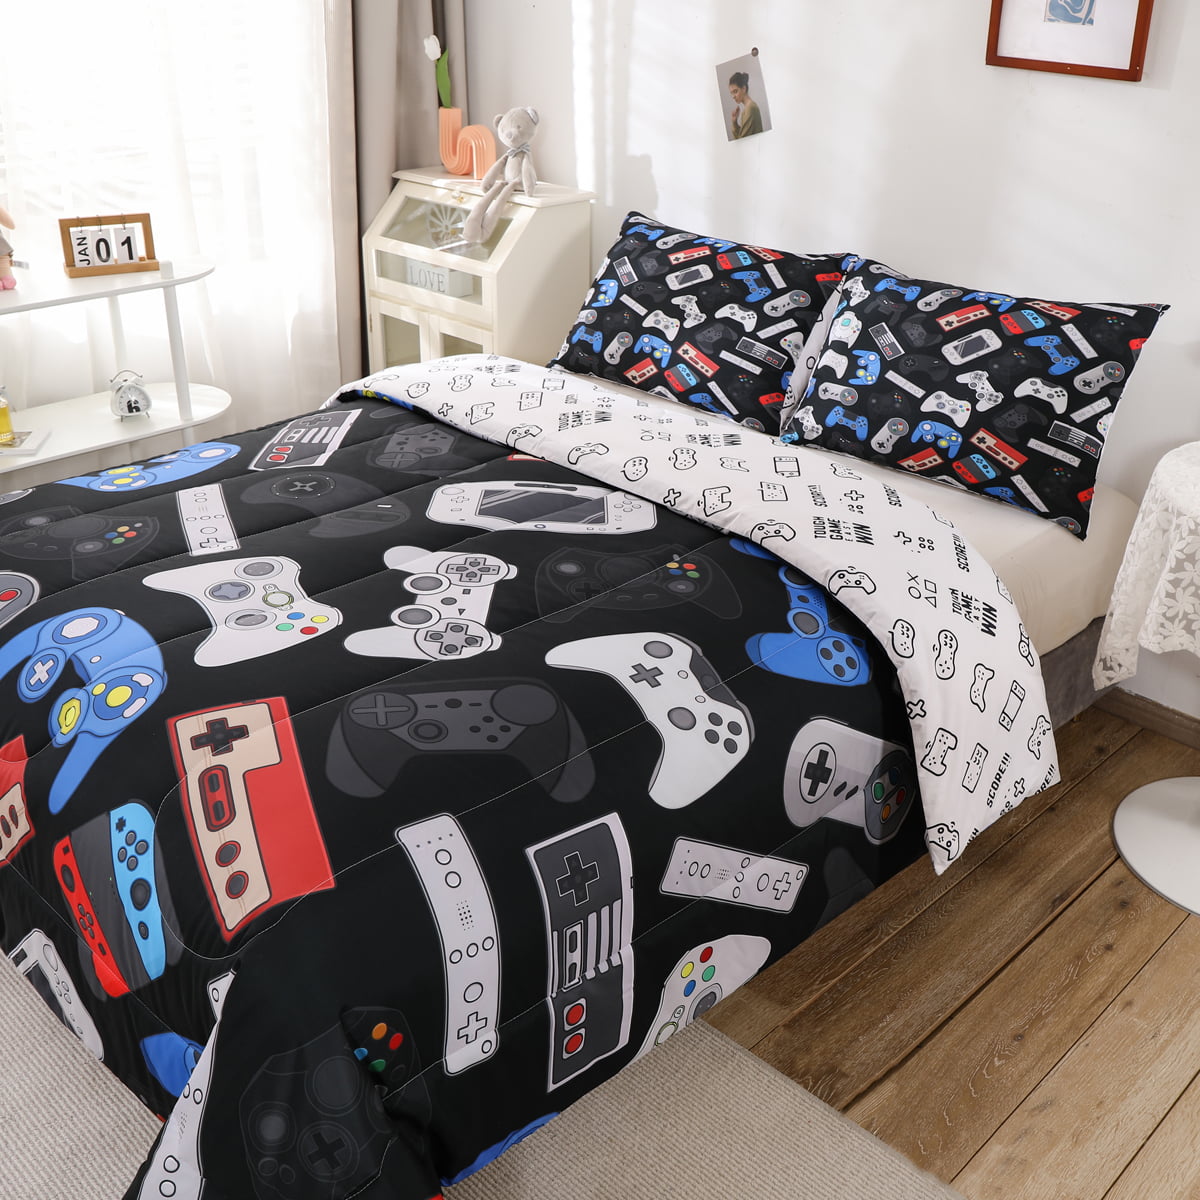  Comforter Set Full Size, Gaming Gamer Retro Cute Soft Bedding  Set for Kids and Adults, Game Funny Bear Comforter Set with 2 Pillowcases  for Bedroom Bed Decor : Home & Kitchen